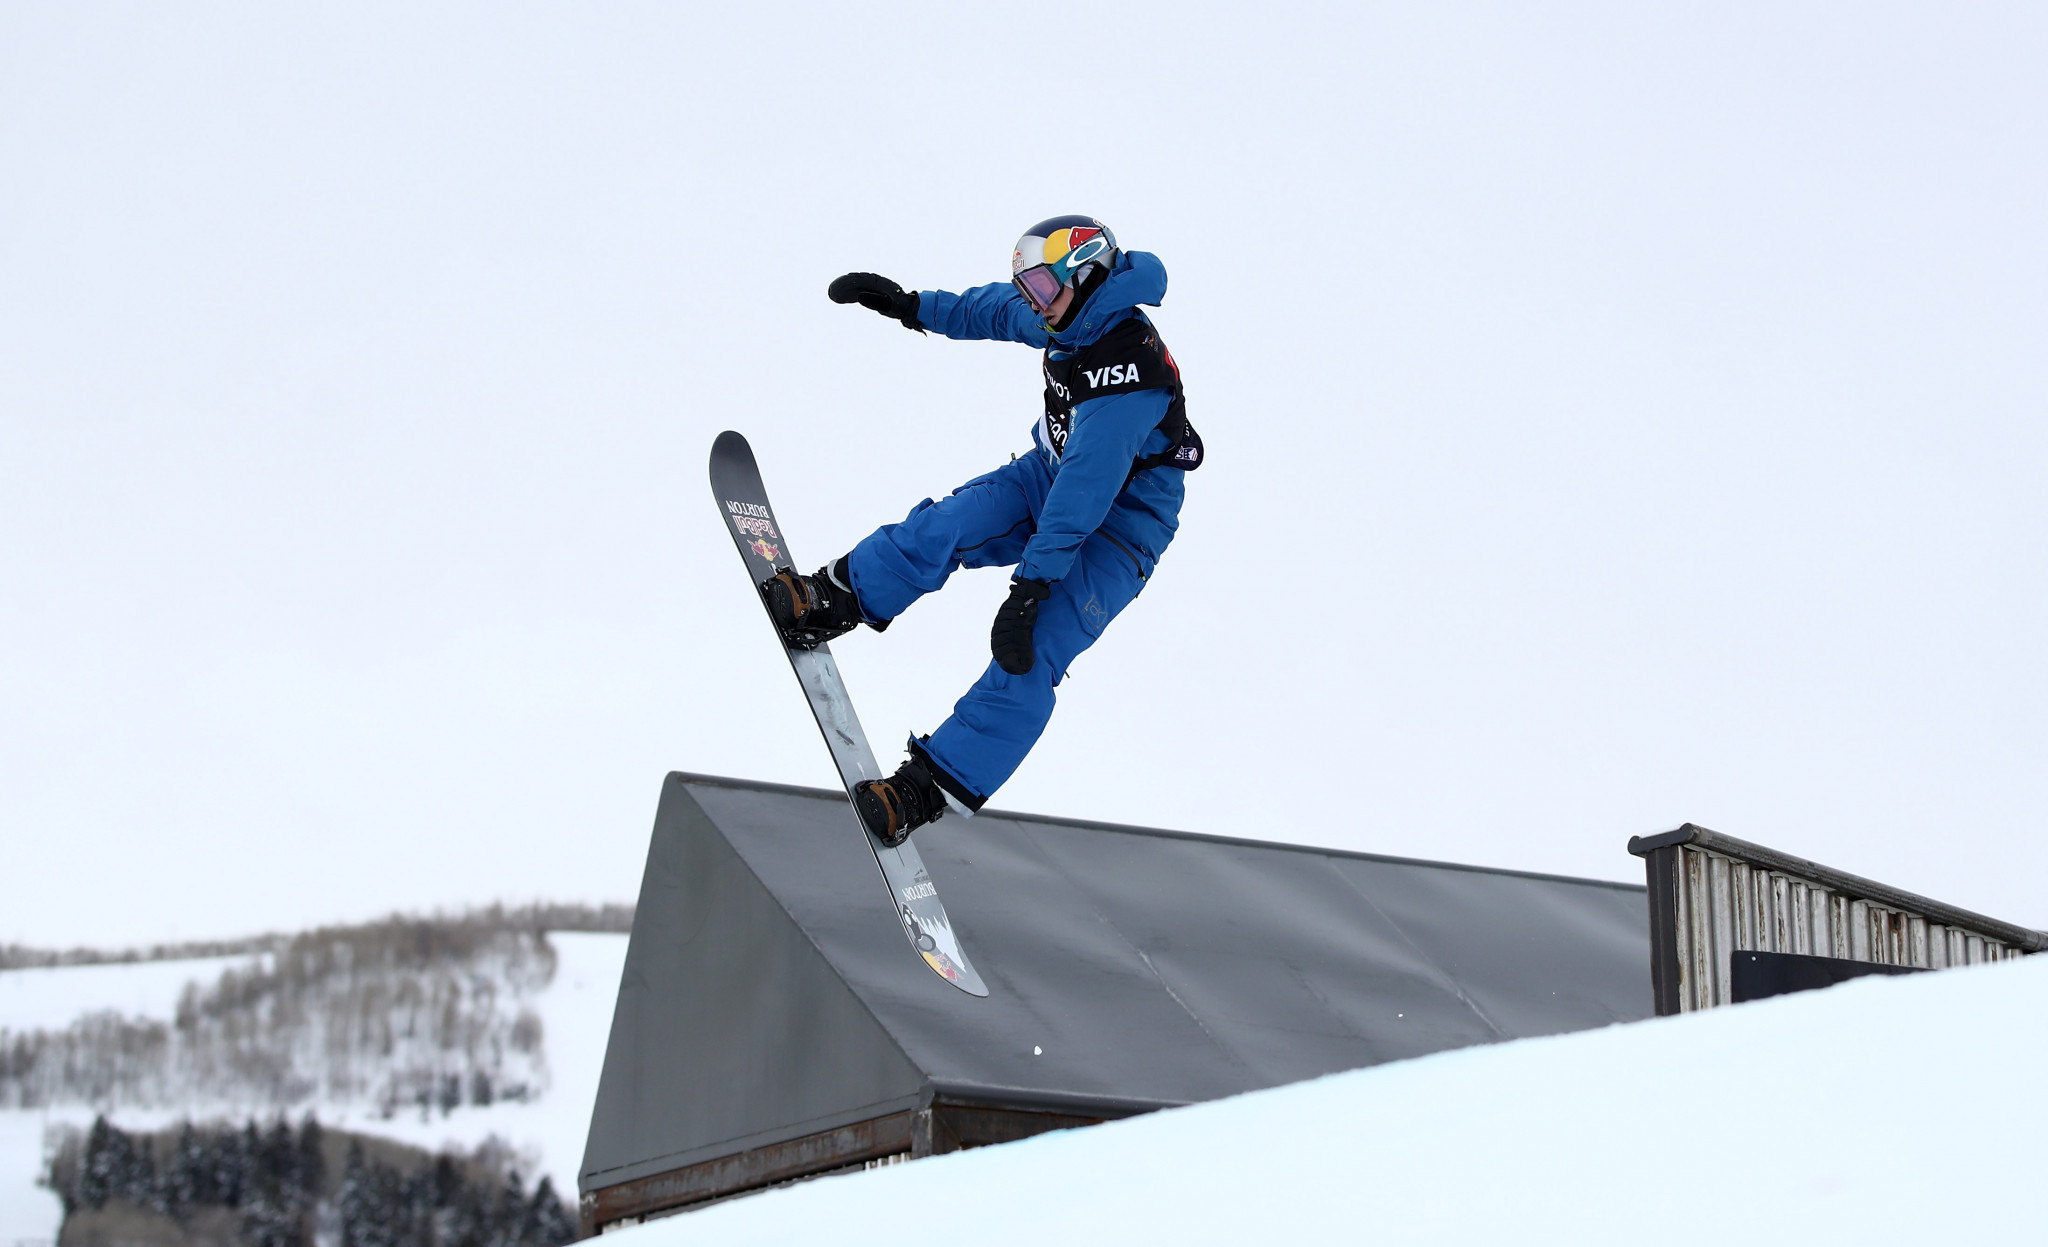 Thorgren and Murase take lead in qualifying at Snowboard Slopestyle World Cup in Silvaplana